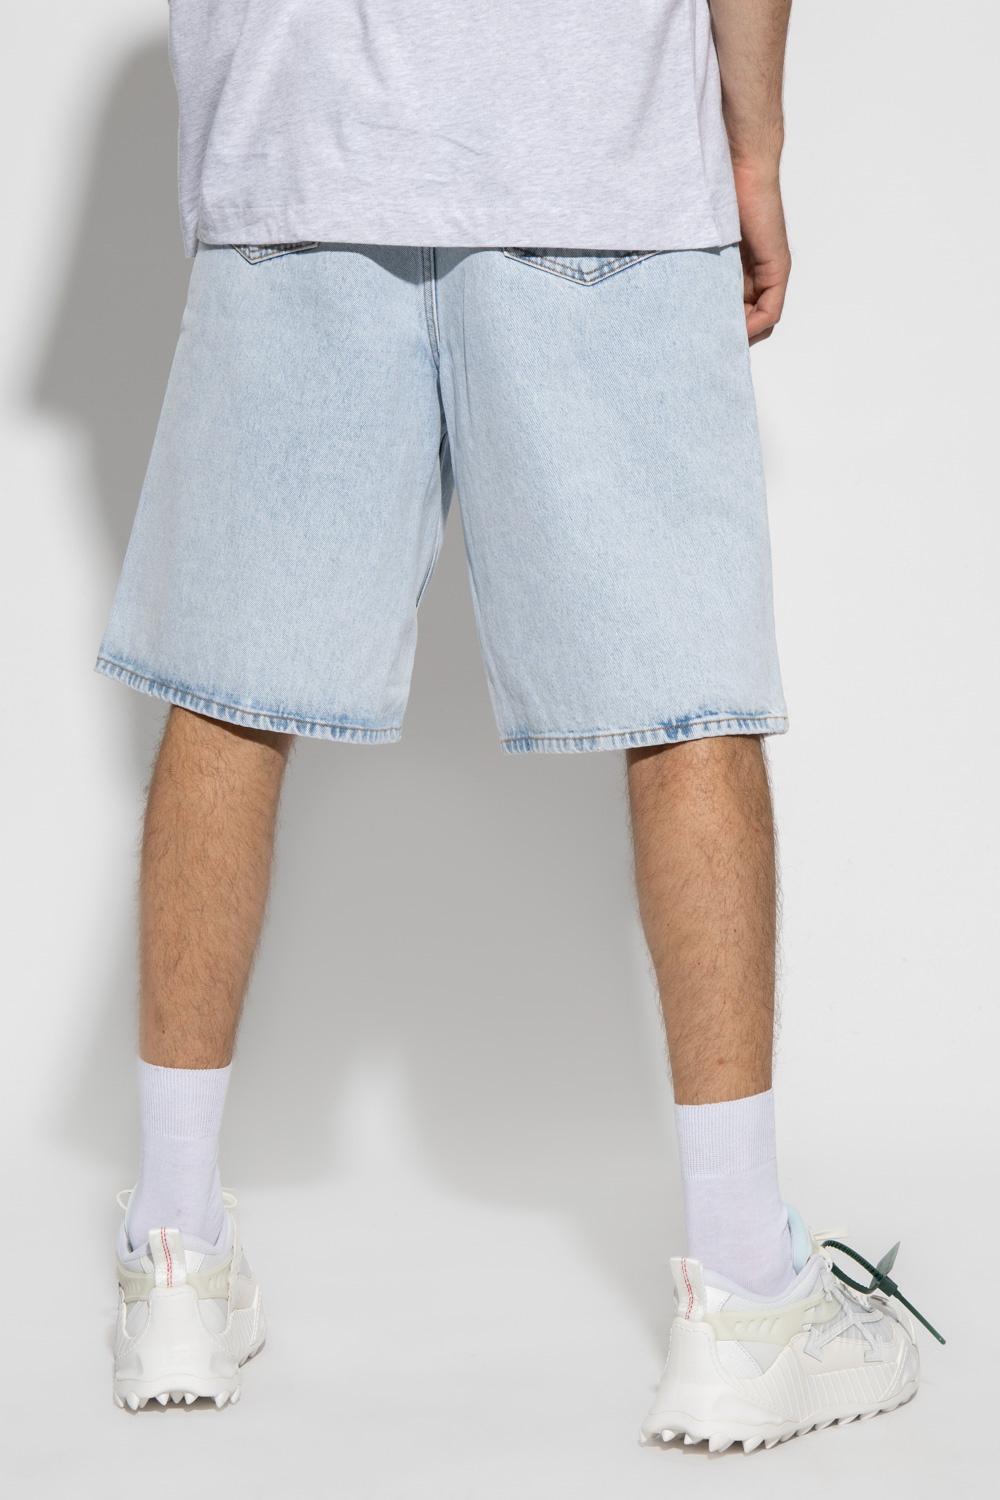 Off-White teamCUP Casuals Men's Soccer Shorts